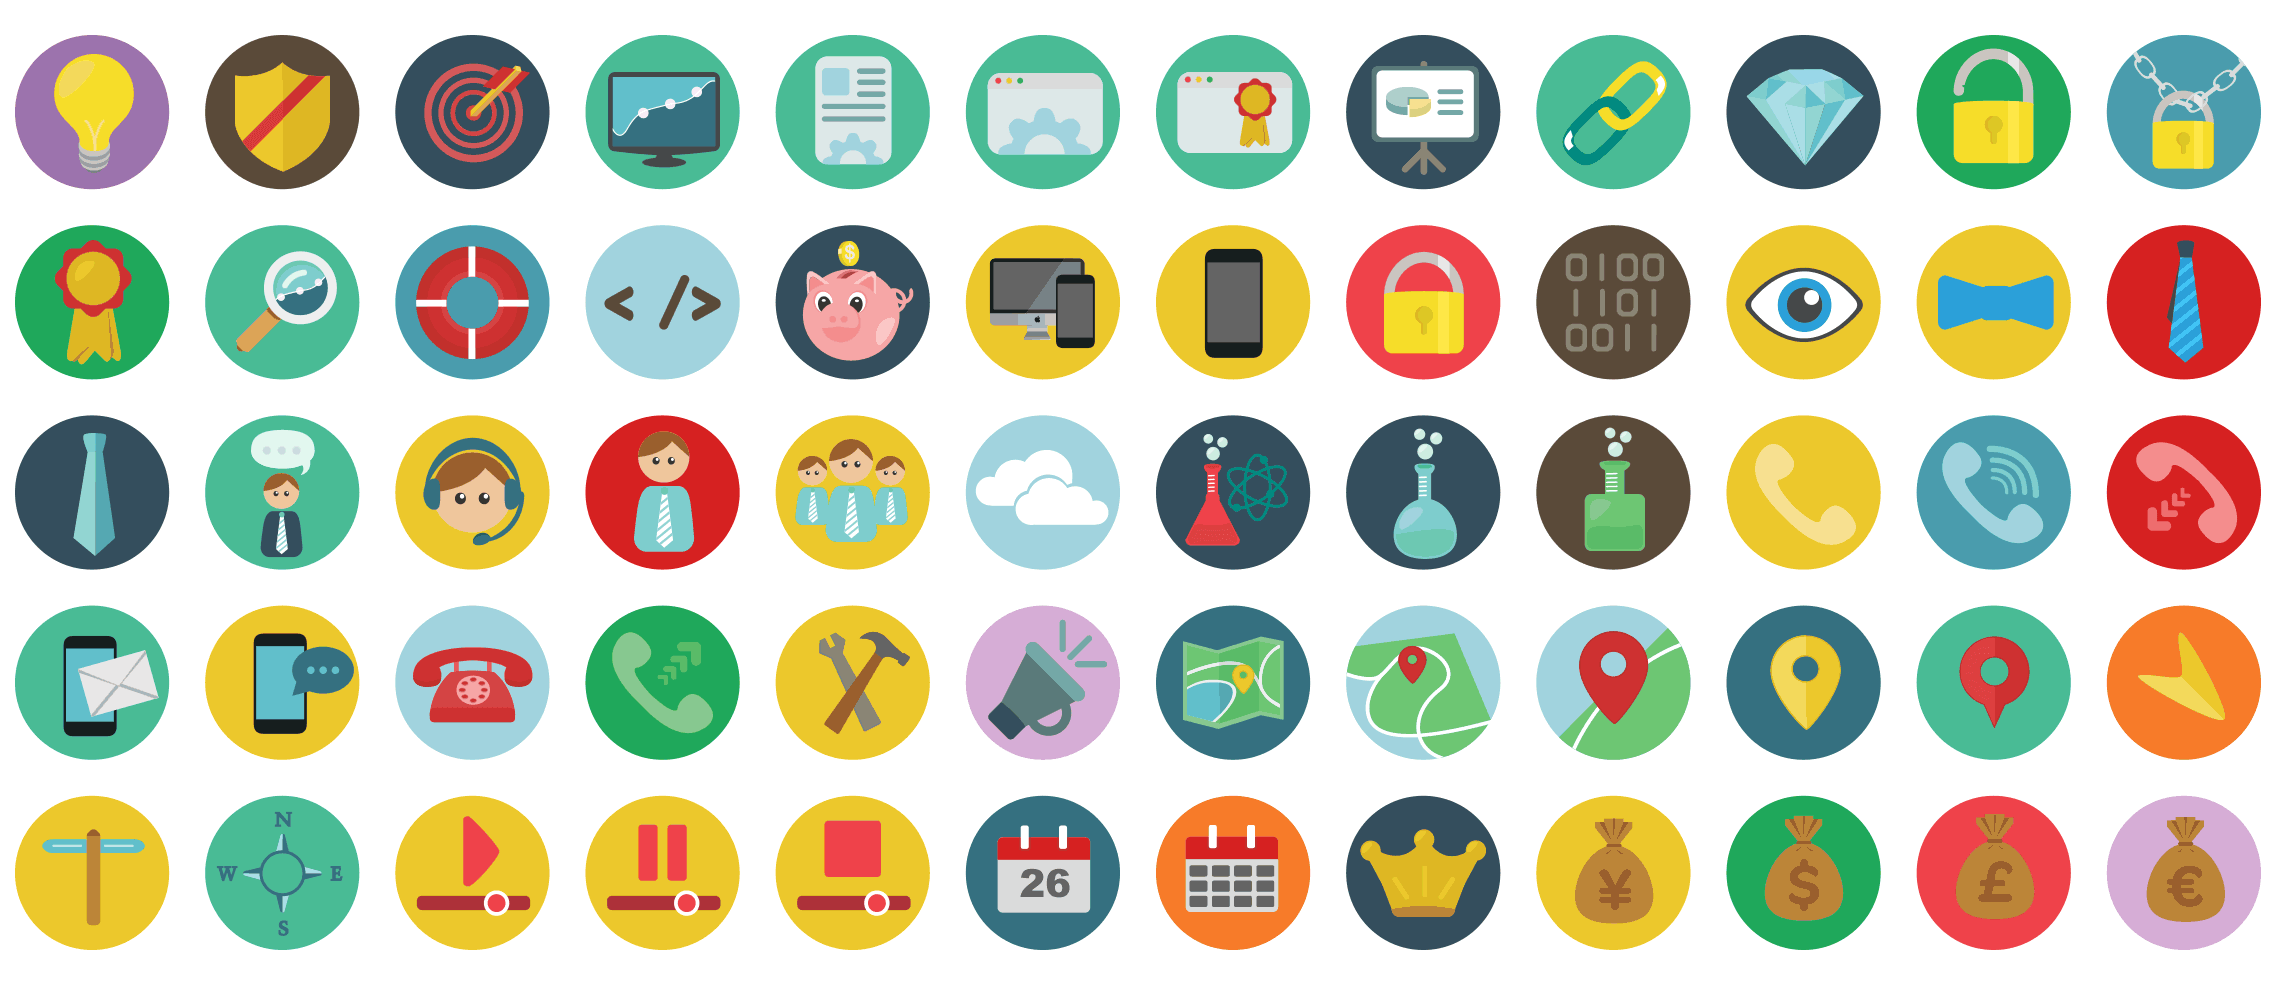 seo-flat-icons-vol-1-preview